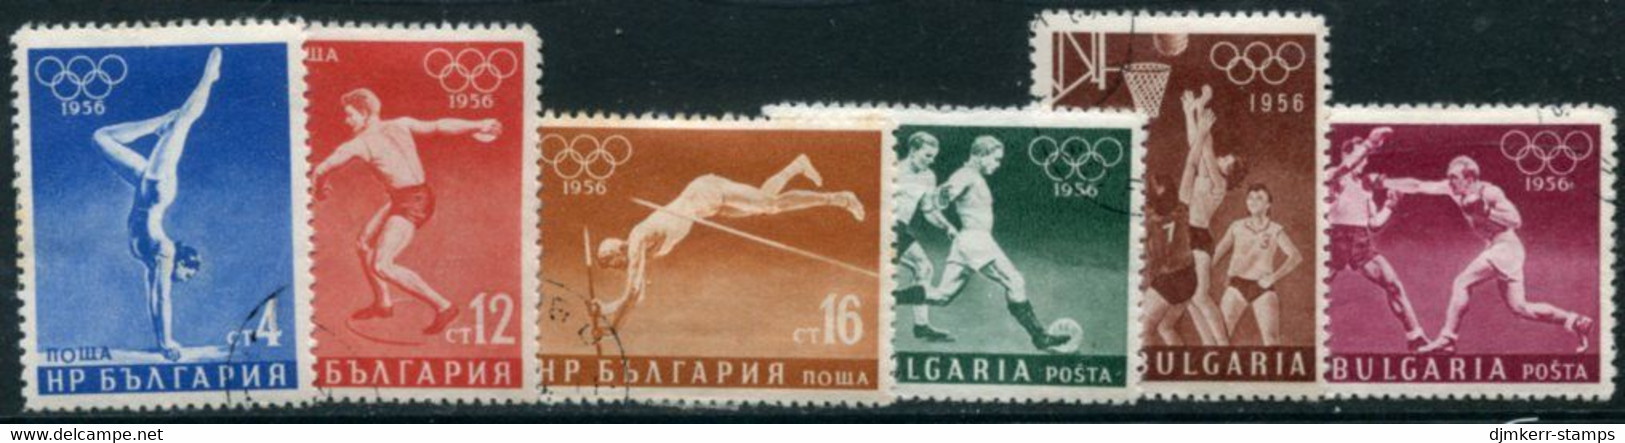 BULGARIA 1956 Olympic Games Used.  Michel 996-1001 - Oblitérés